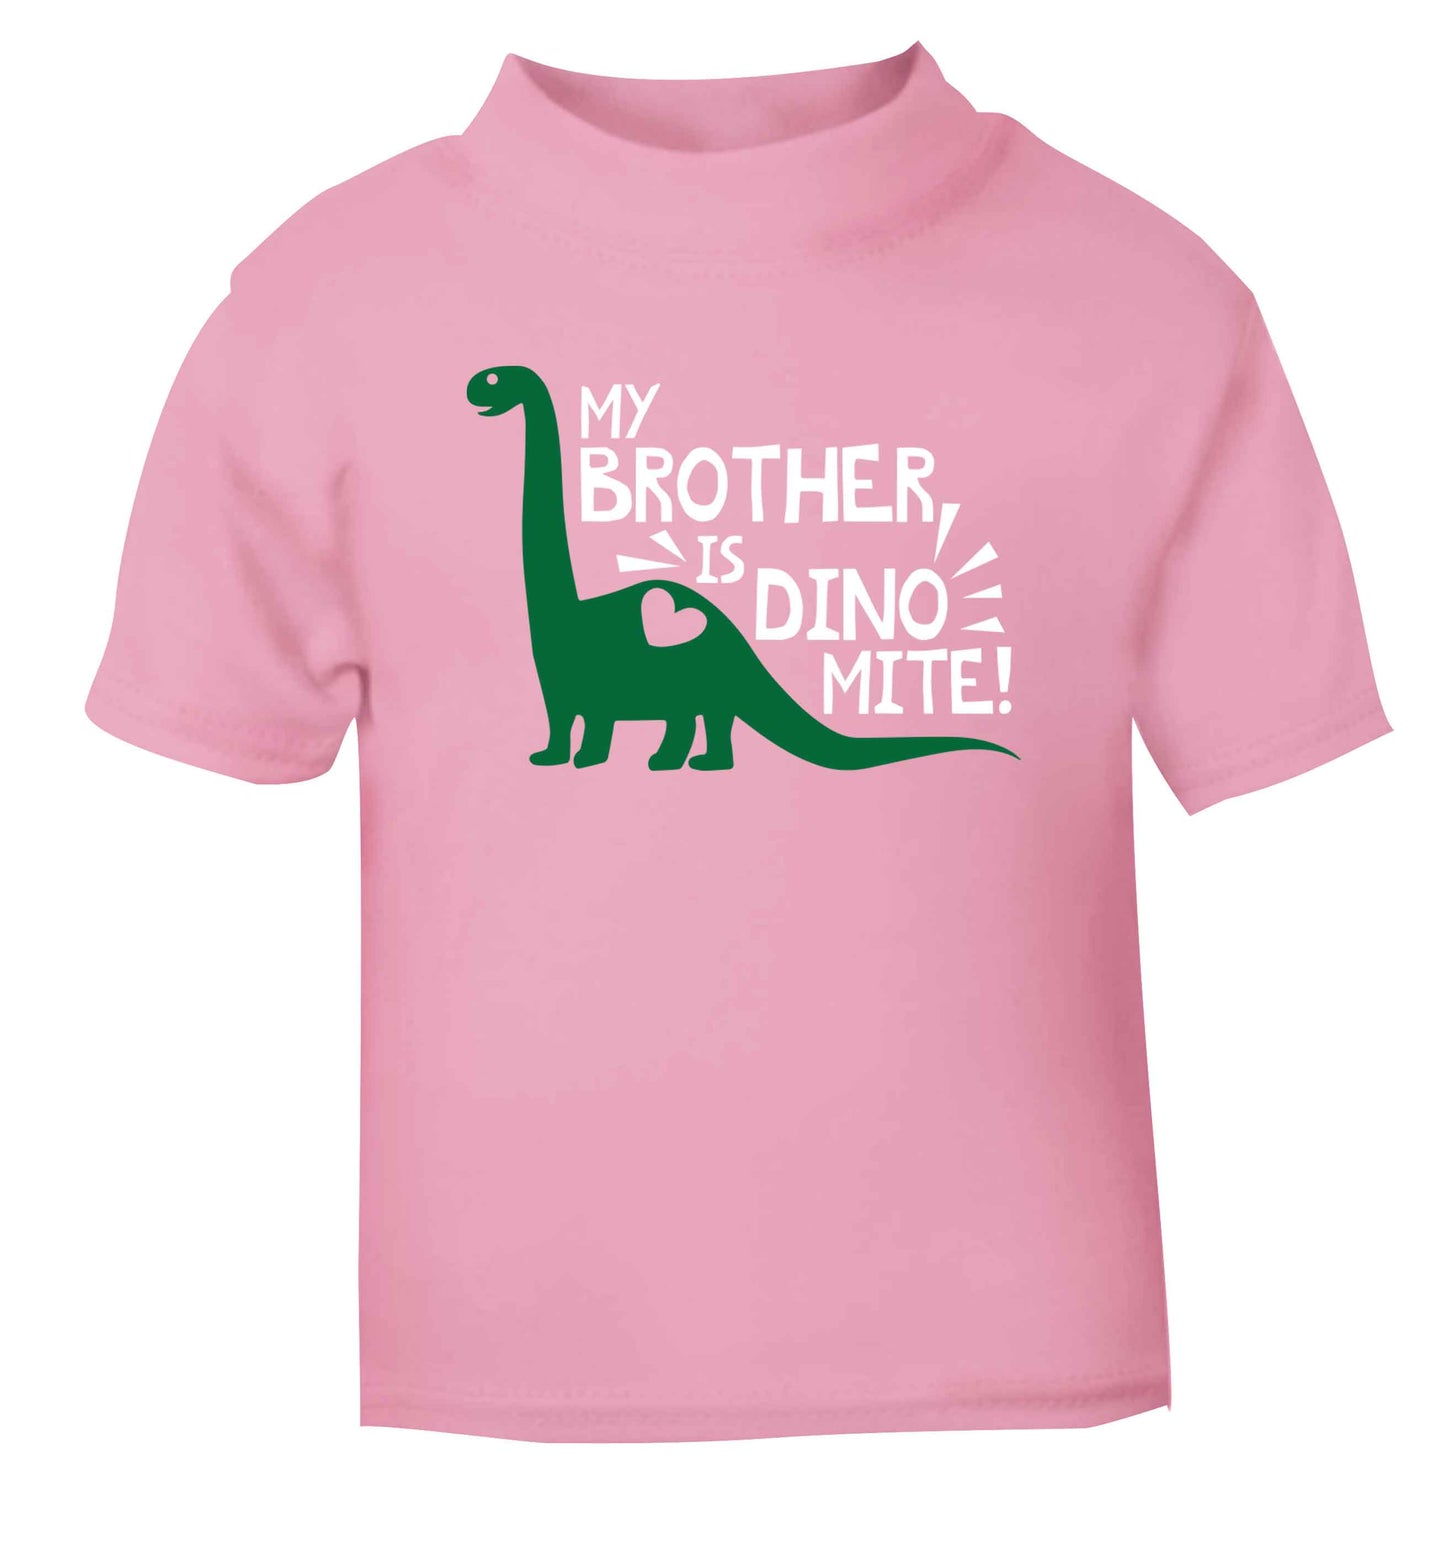 My brother is dinomite! light pink Baby Toddler Tshirt 2 Years